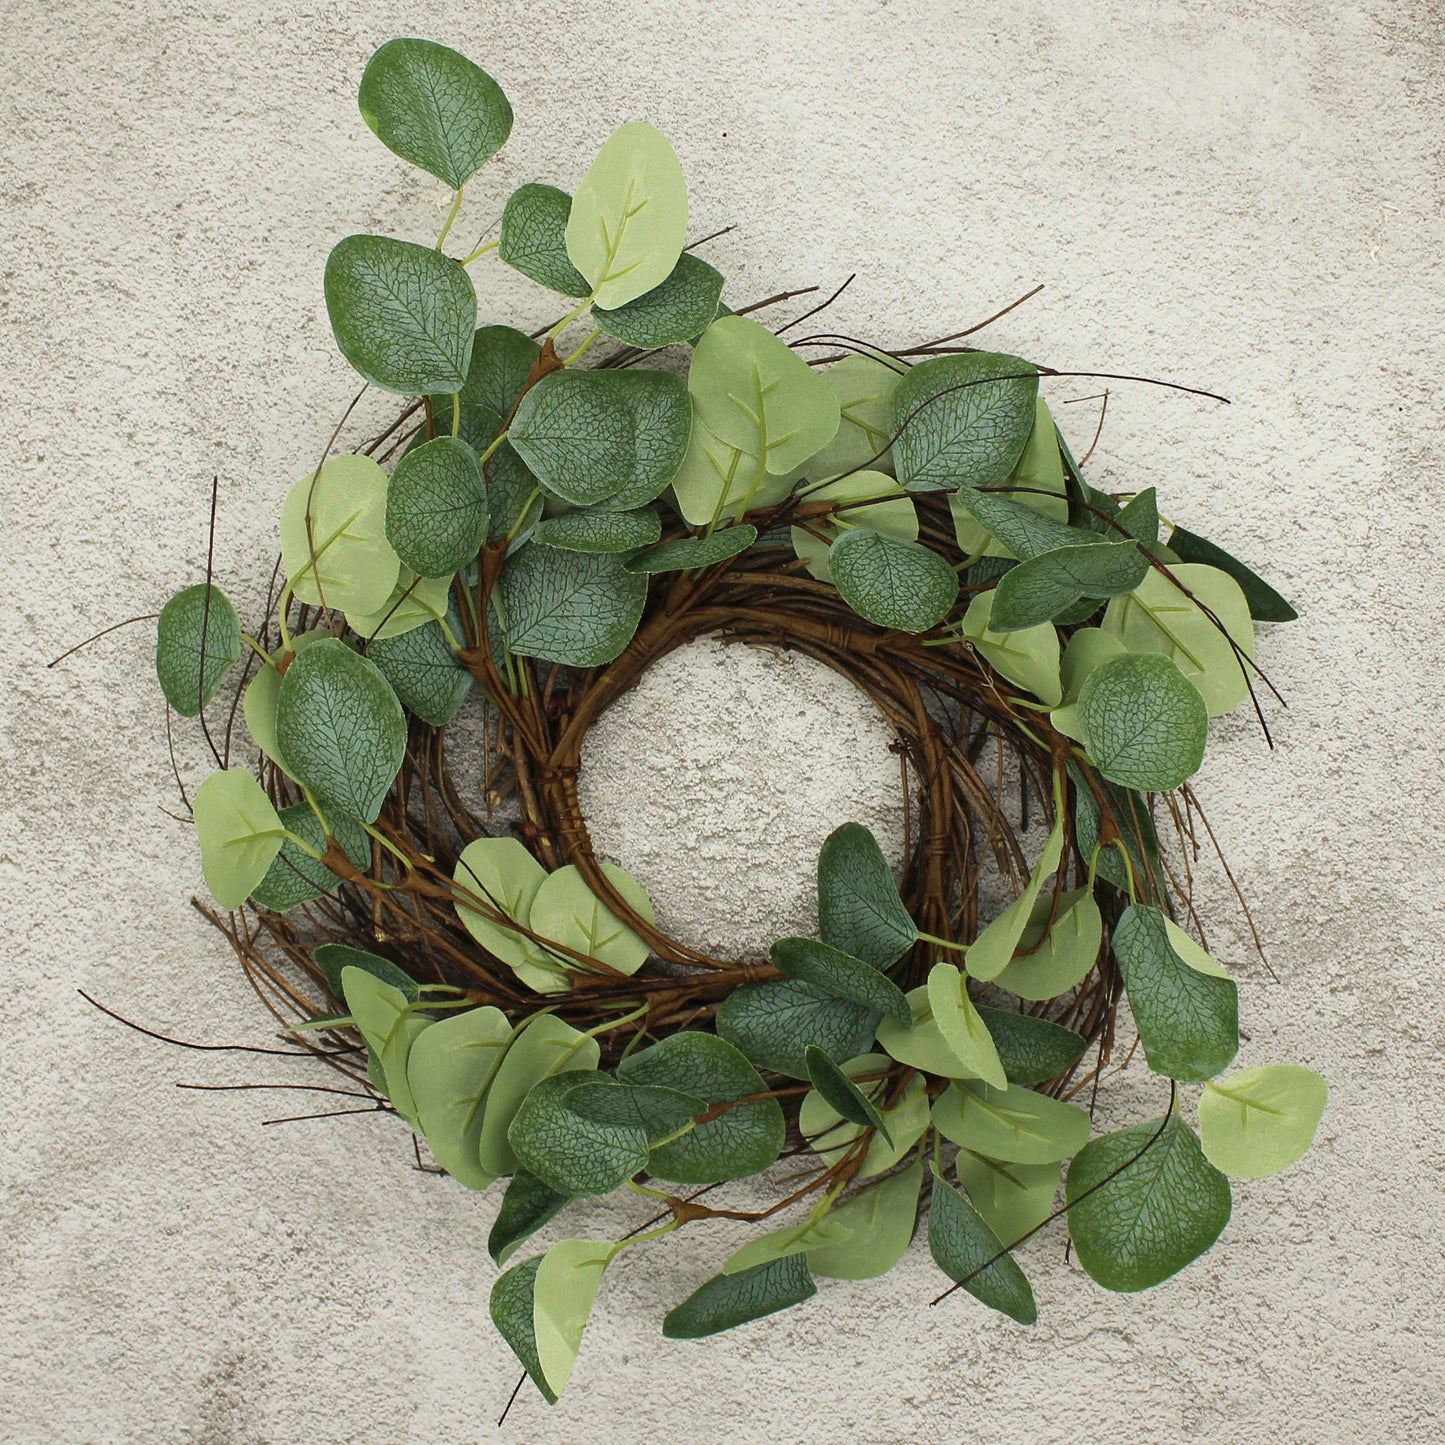 CVHOMEDECO. Rustic Country Artificial Eucalyptus Leaves and Twig Wreath, Year Round Full Green Wreath for Indoor or Outdoor Display, 12 Inch